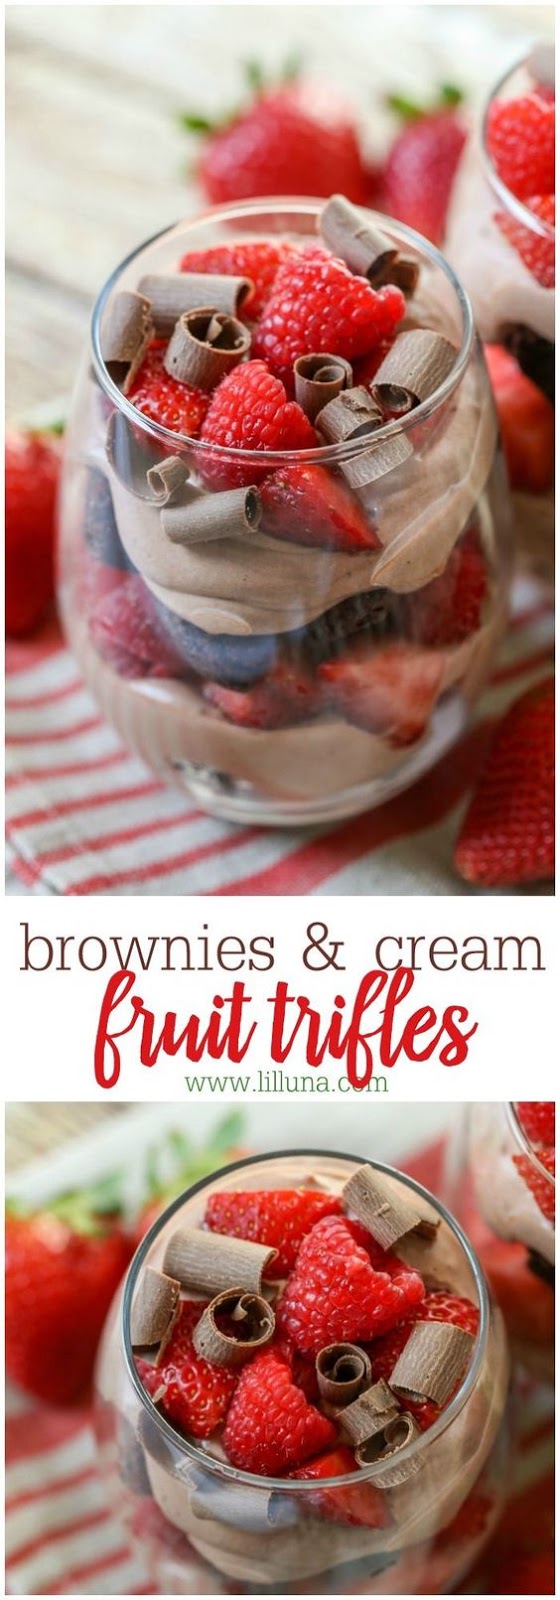 Brownies and Cream Fruit Trifle - a chocolatey dessert filled with brownie chunks, chocolate cream, strawberries and raspberries and chocolate curls!